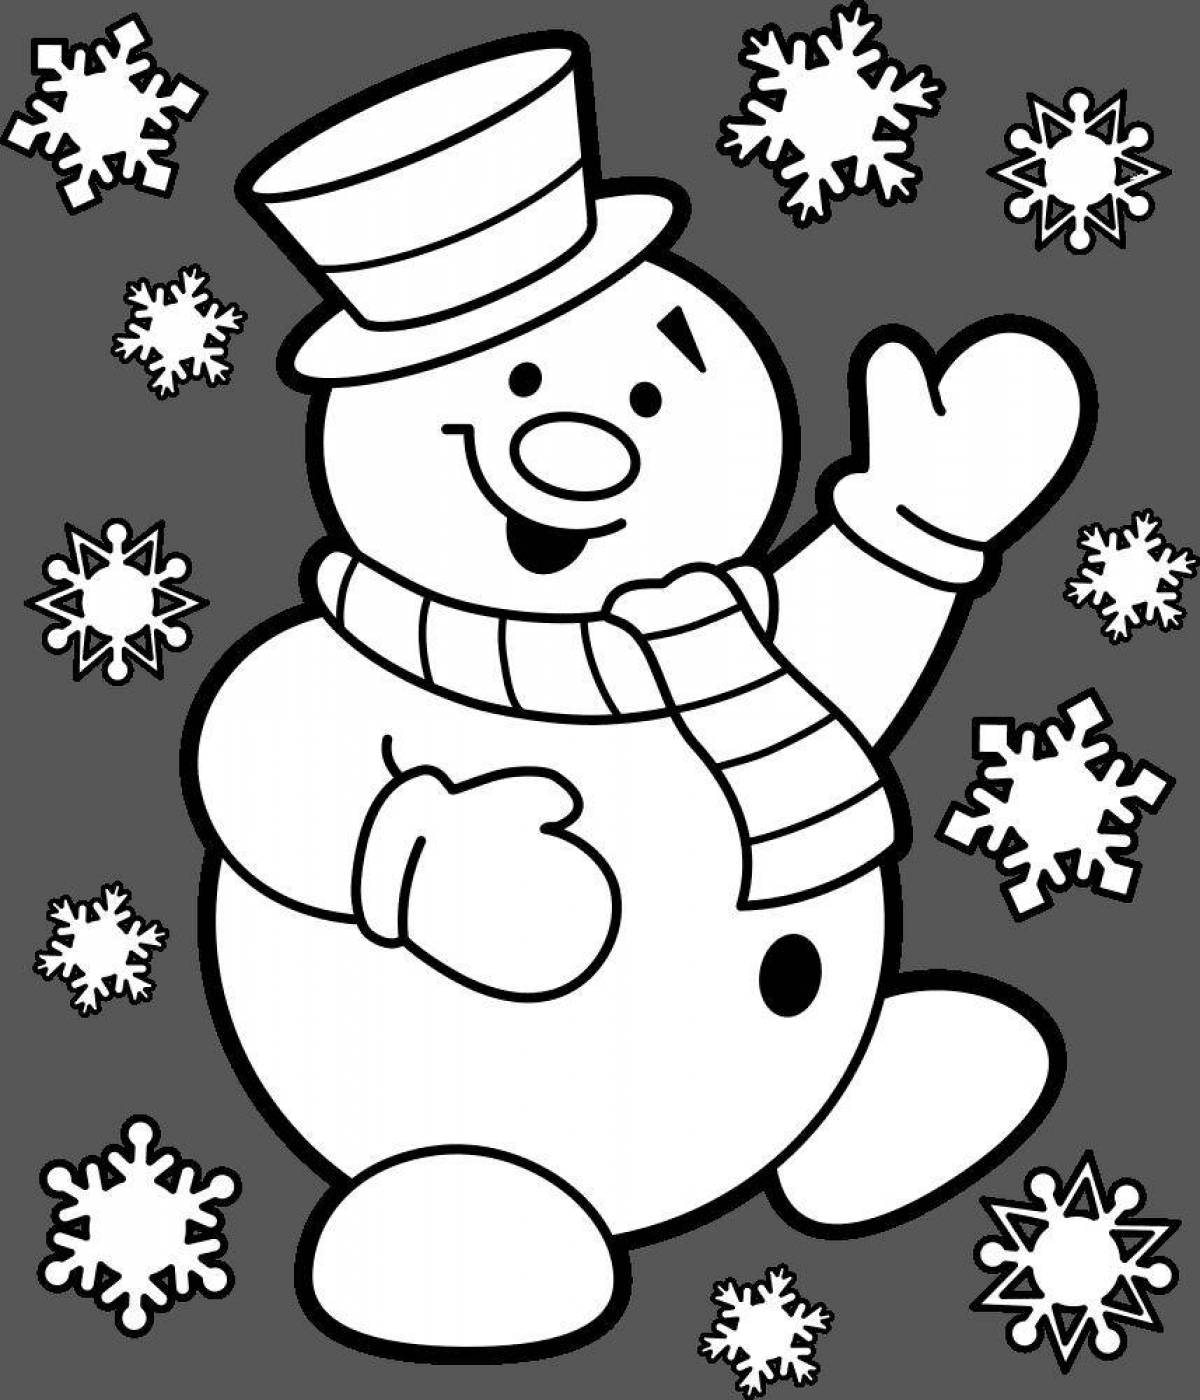 Sparkling snowman drawing